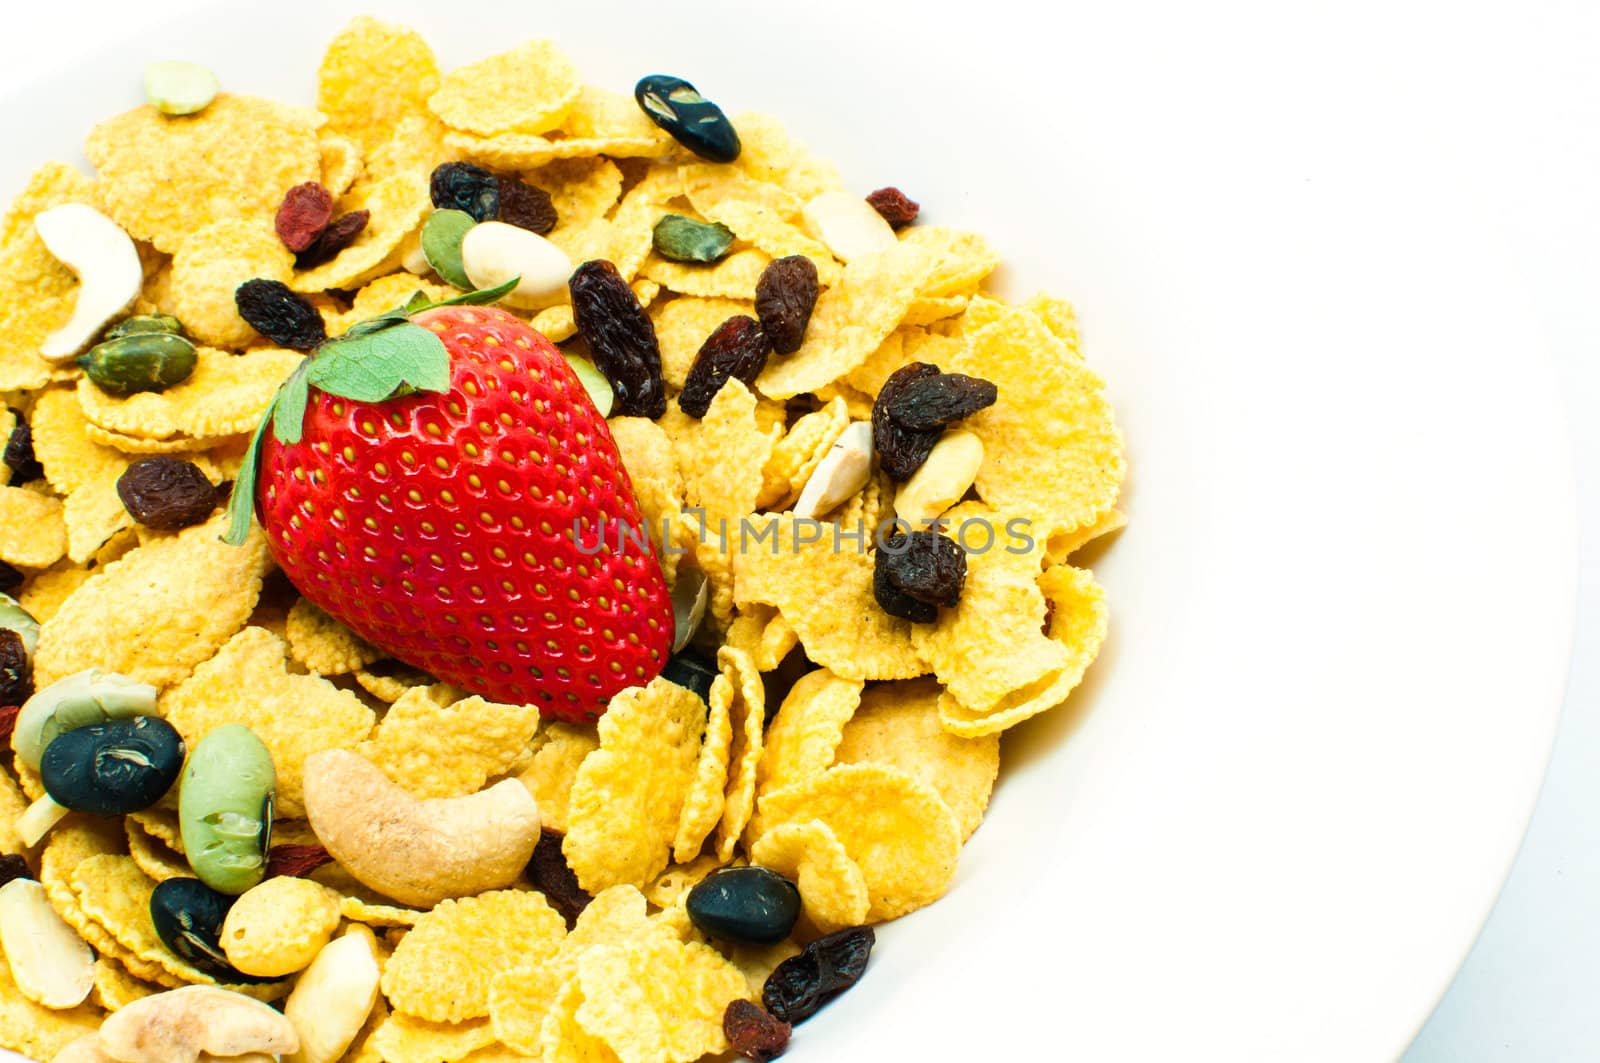 cereal with strawberry and mixed nut by TanawatPontchour